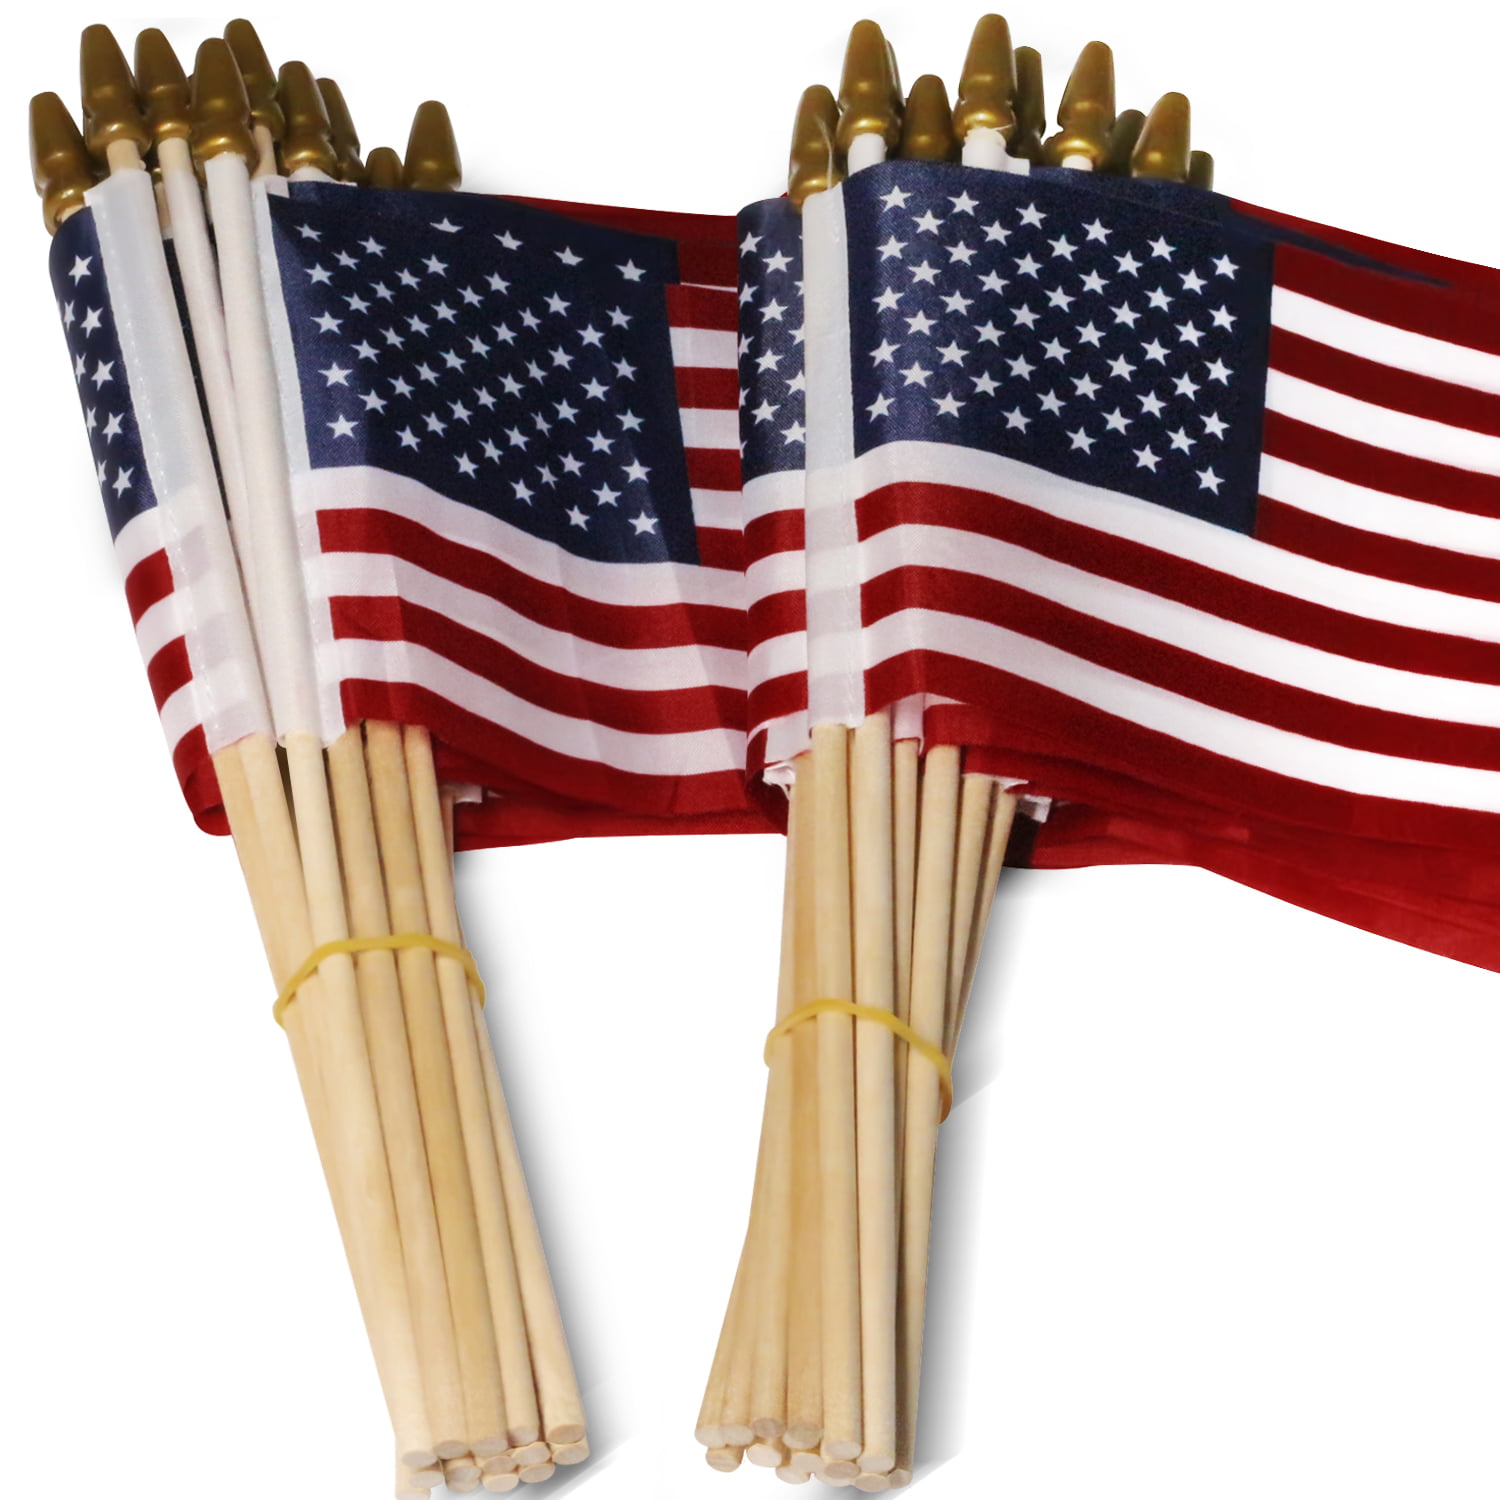 Small American Flags on Stick 5x8 Inch/12 Pack Mini Ameirican Flags/Handheld American Wooden Stick Flag Spear Top